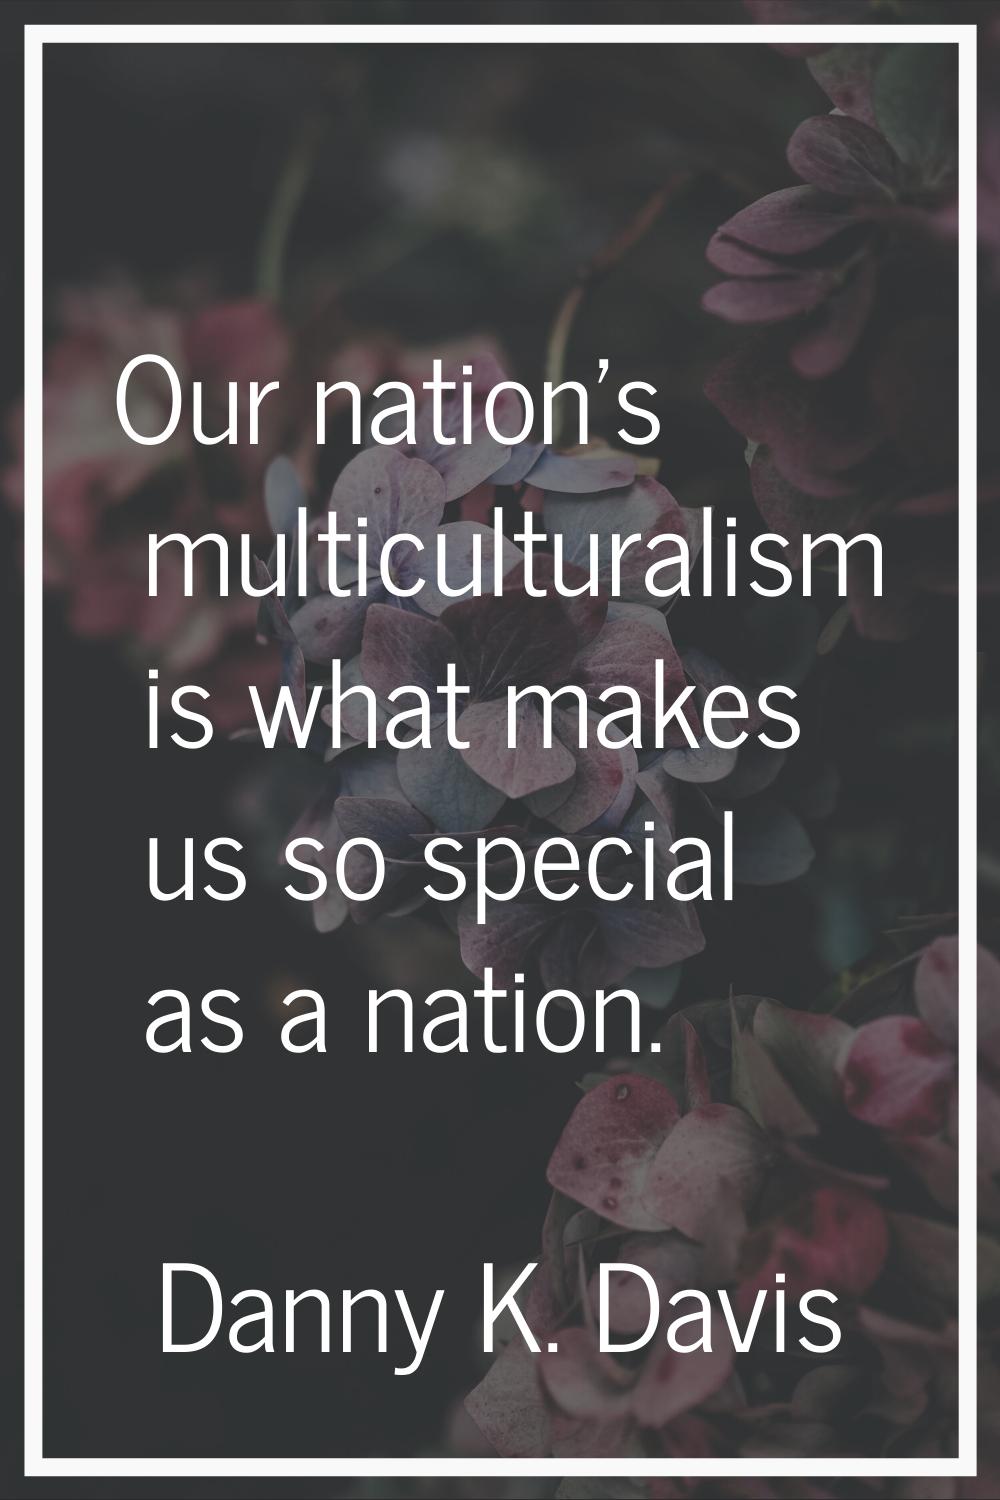 Our nation's multiculturalism is what makes us so special as a nation.